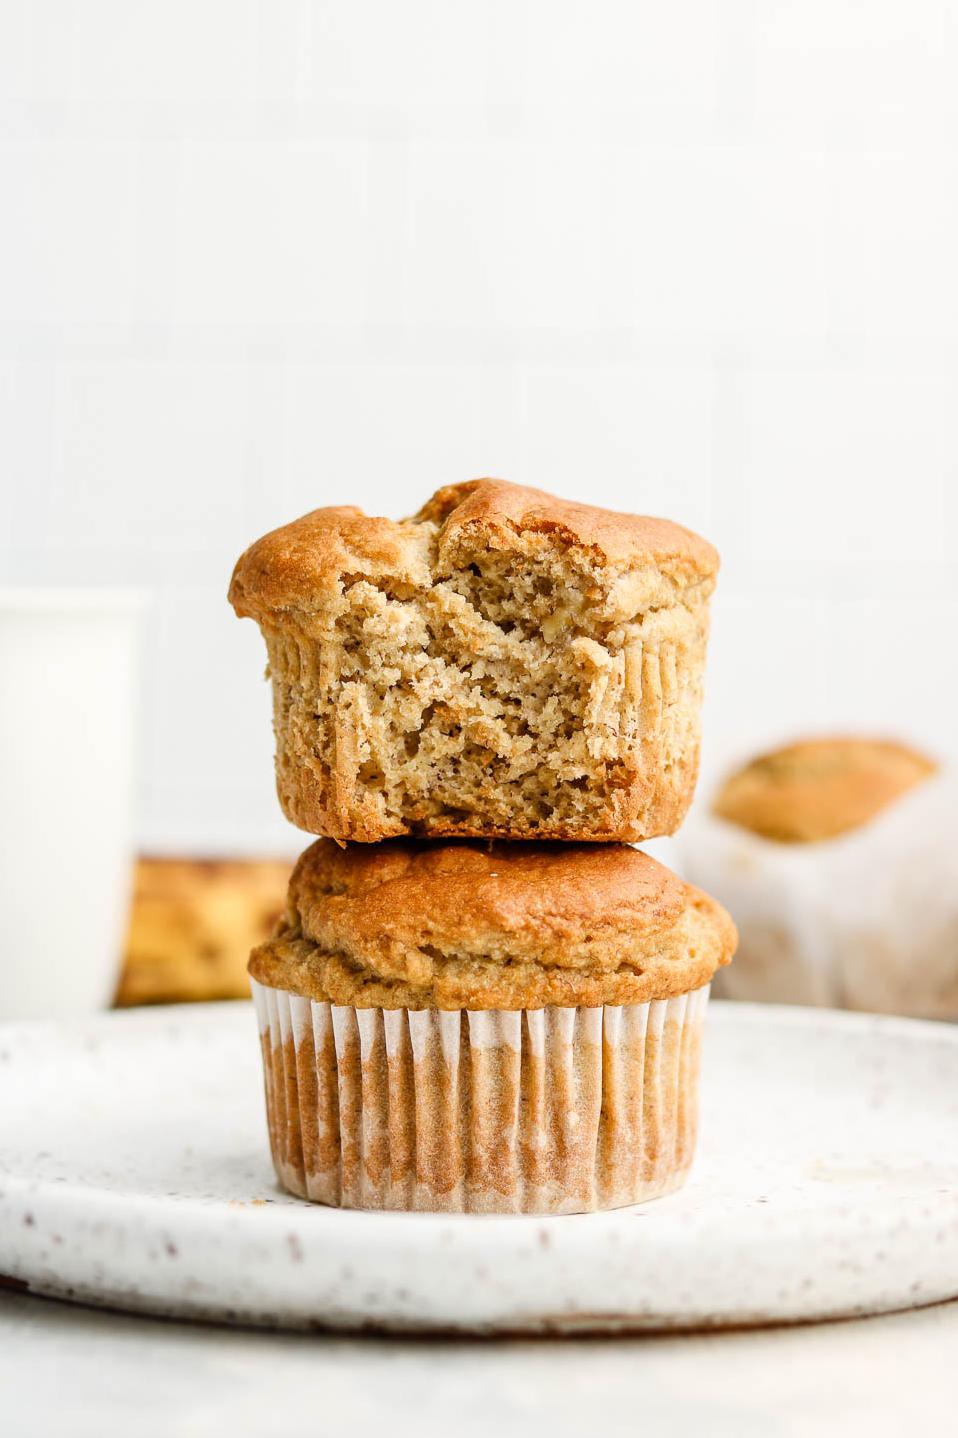   No gluten, no problem! These banana muffins are delicious and allergen-friendly.